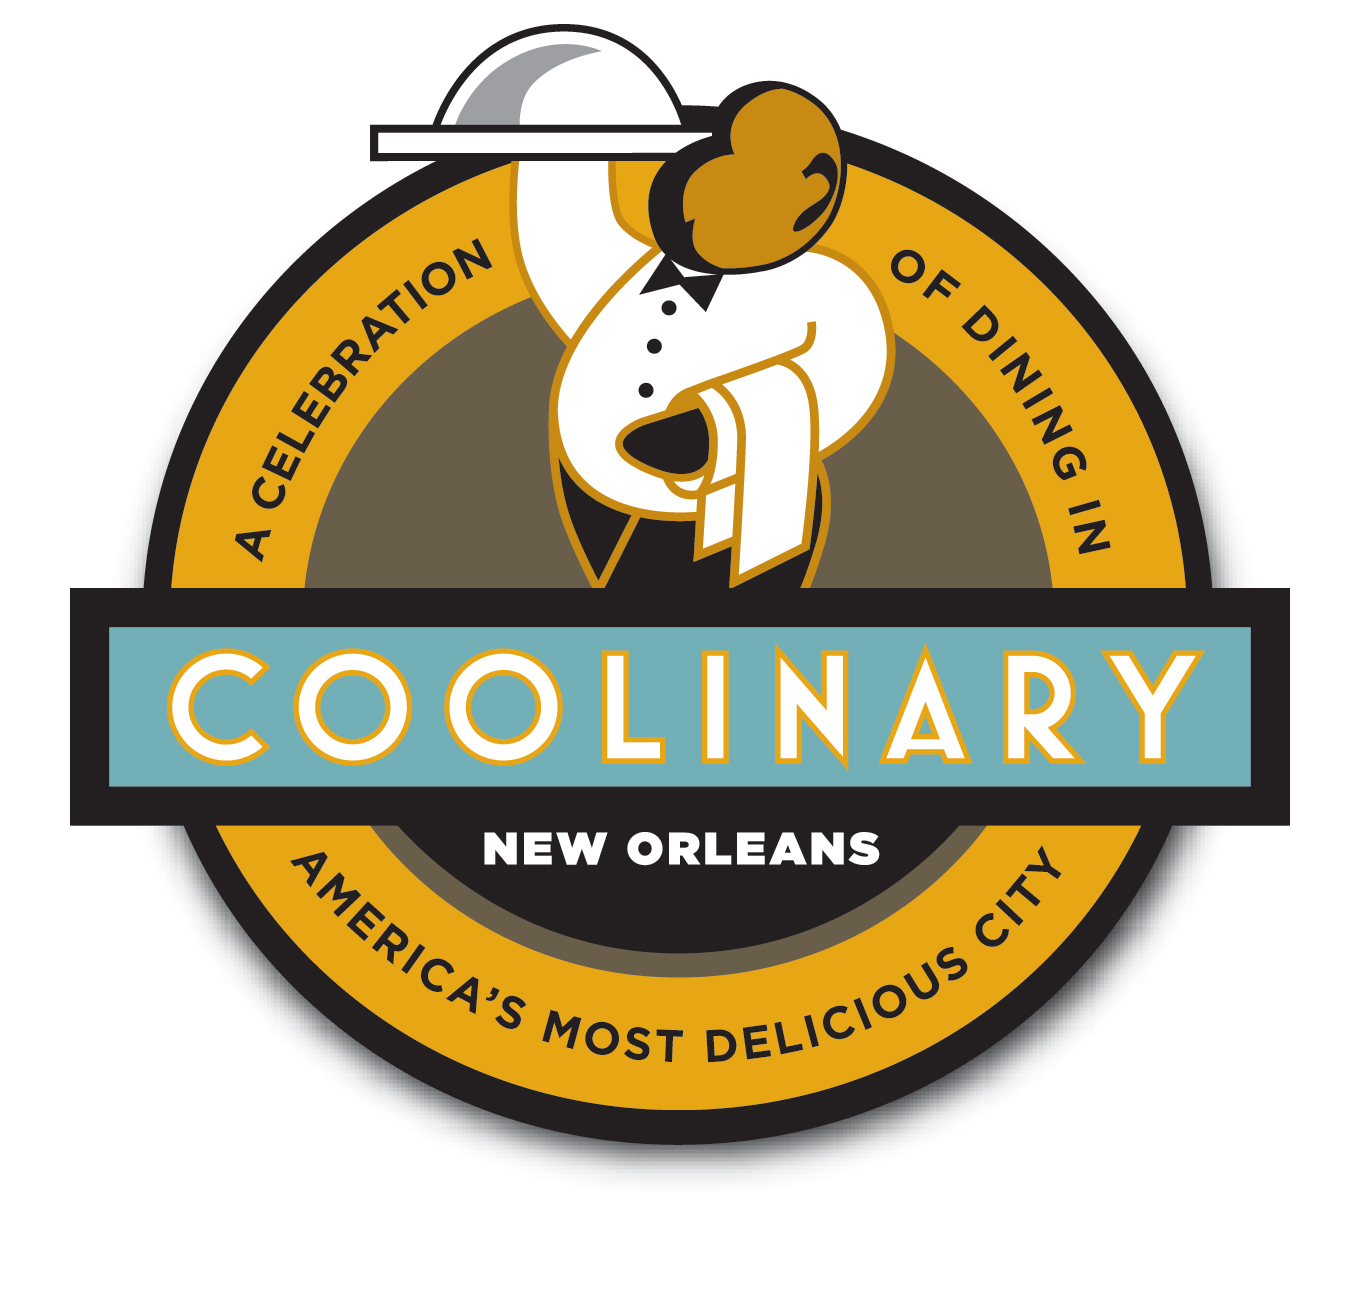 New Orleans Launches 11th Annual COOLinary New Orleans Restaurant Month